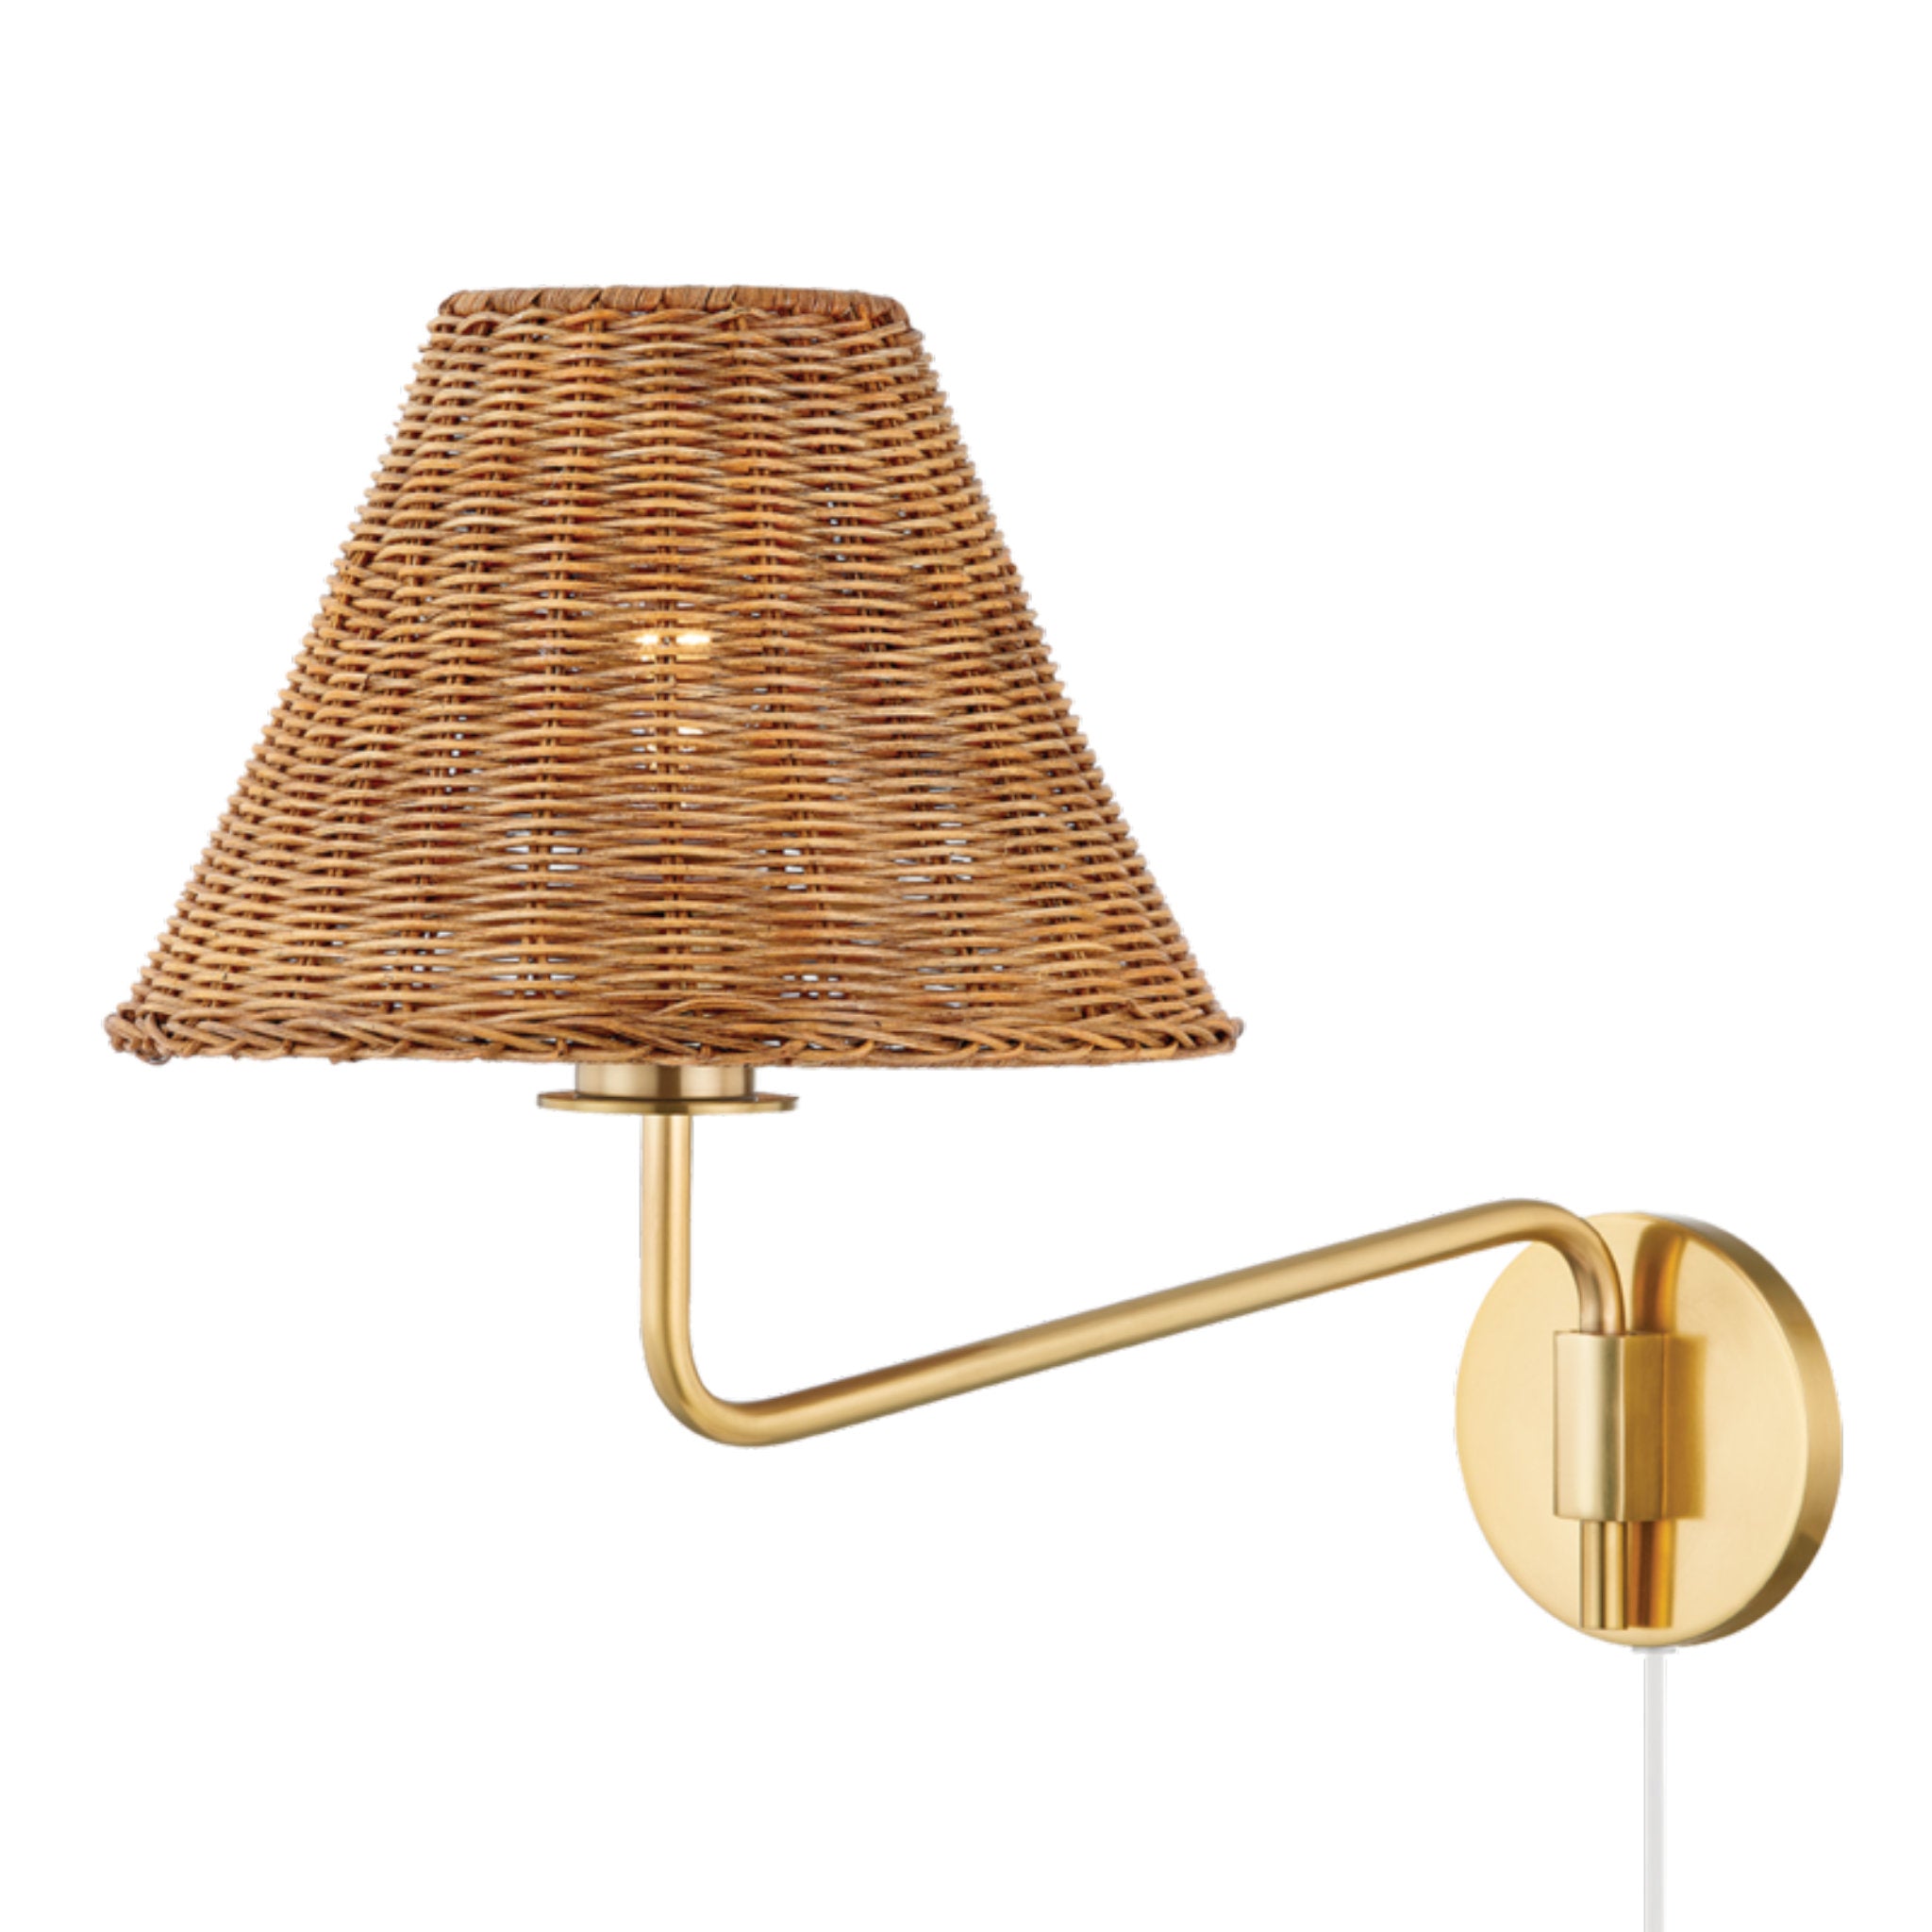 Issa 1-Light Plug-in Sconce in Aged Brass by Tali Roth